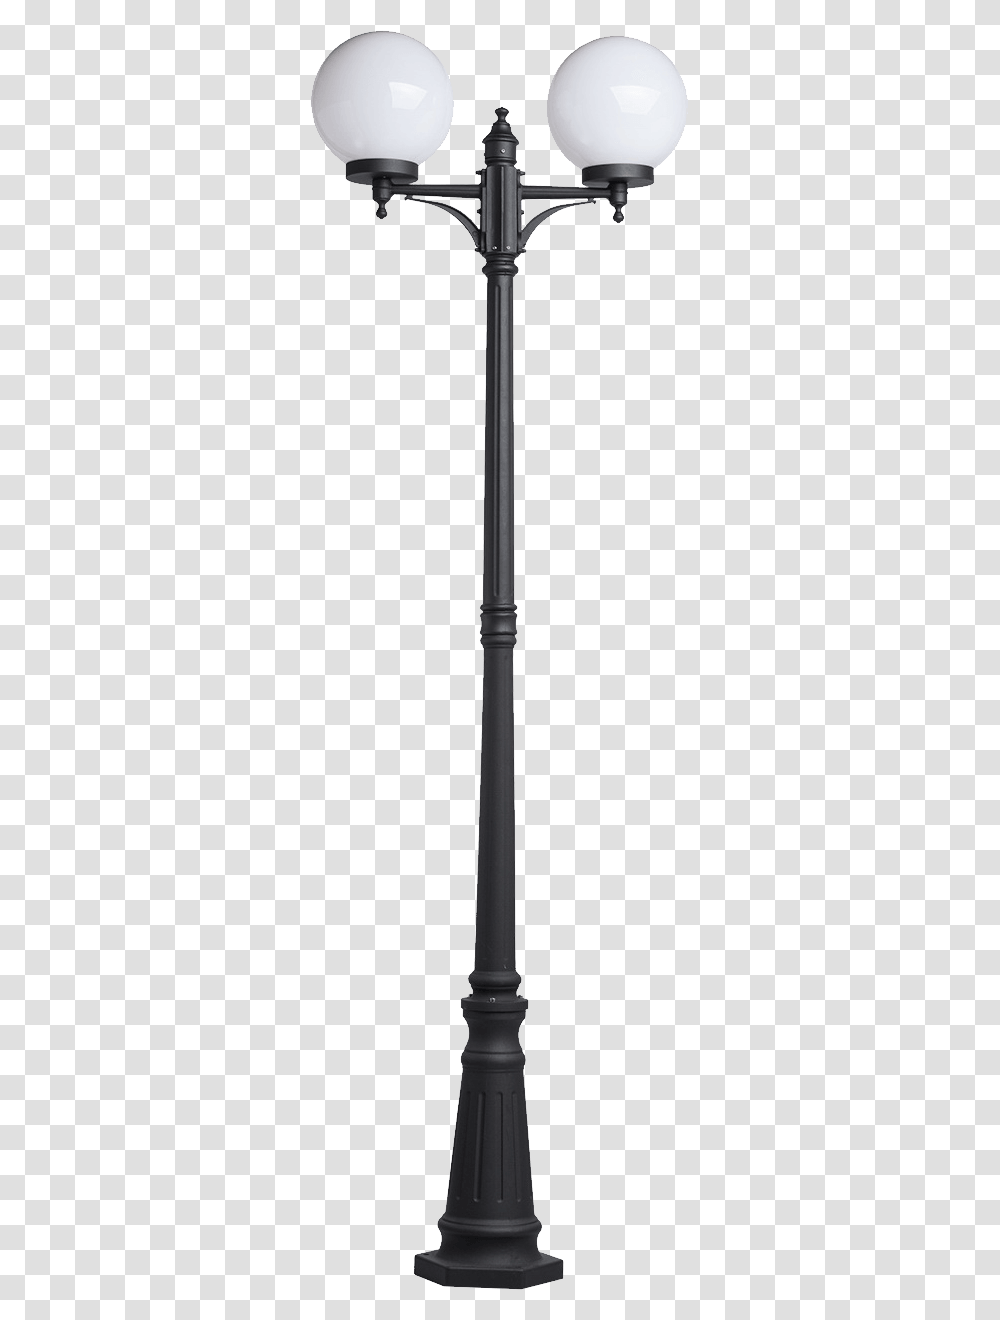 Street Light Background Images Street Light Hd, Lamp Post, Lampshade Transparent Png